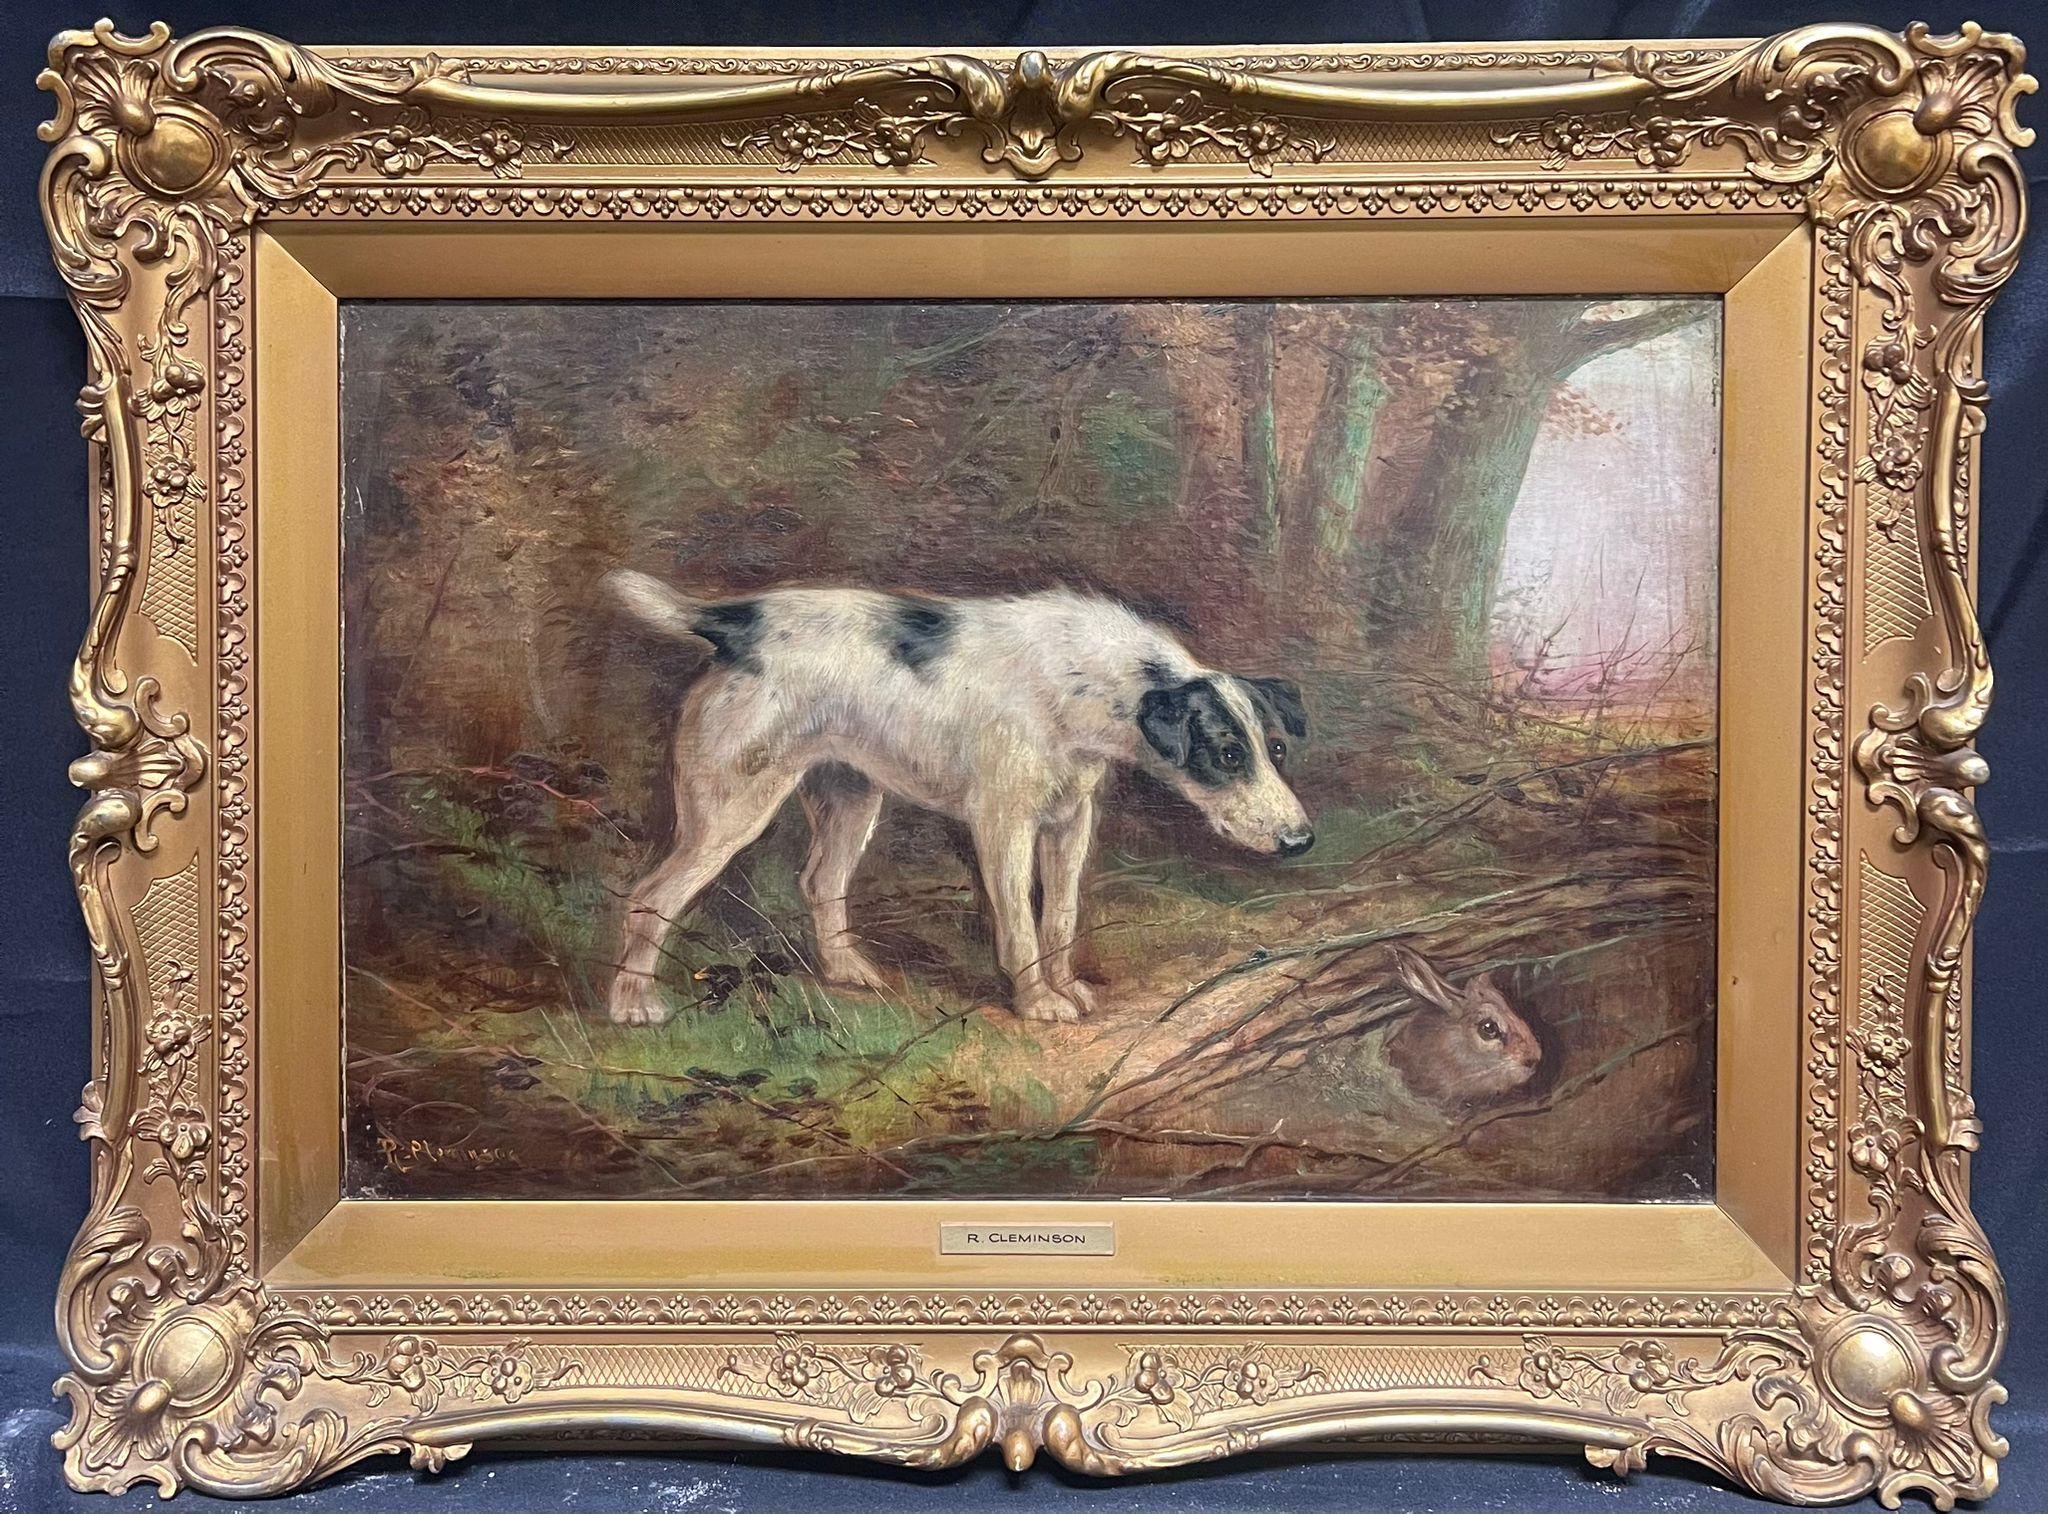 Robert Cleminson Animal Painting - Signed Victorian Oil Painting Terrier Dog Chasing Rabbit down Hole Gilt Framed